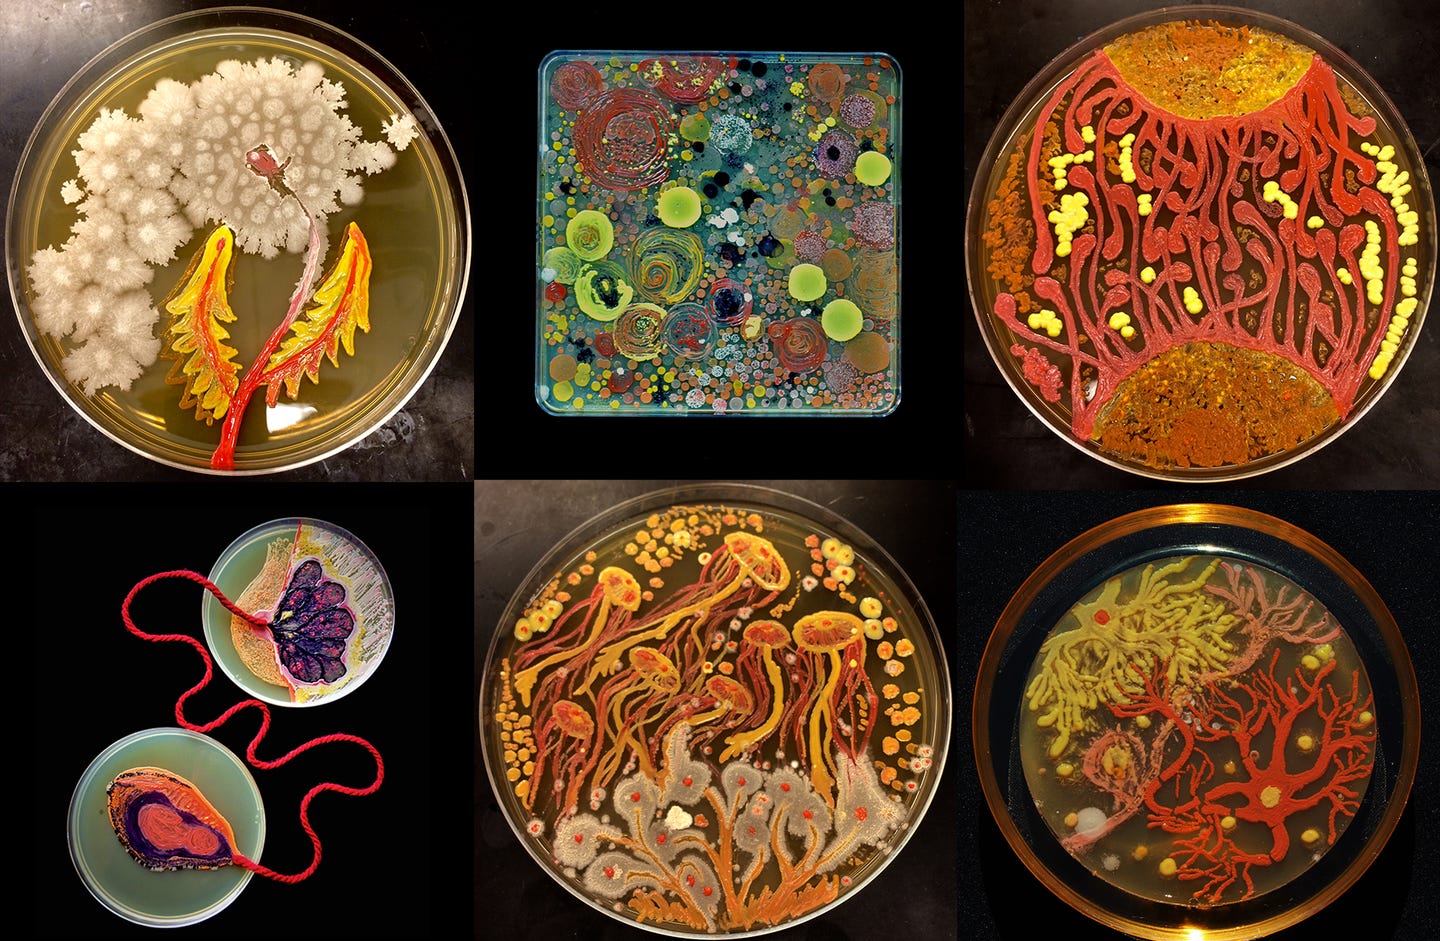 a collage of six plates of agar growing colorful bacteria that has been intentionally grown in artistic shapes. some of the plates include representations of jellyfish and neurons. there's also abstract art like two plates representing a connection between mother and child